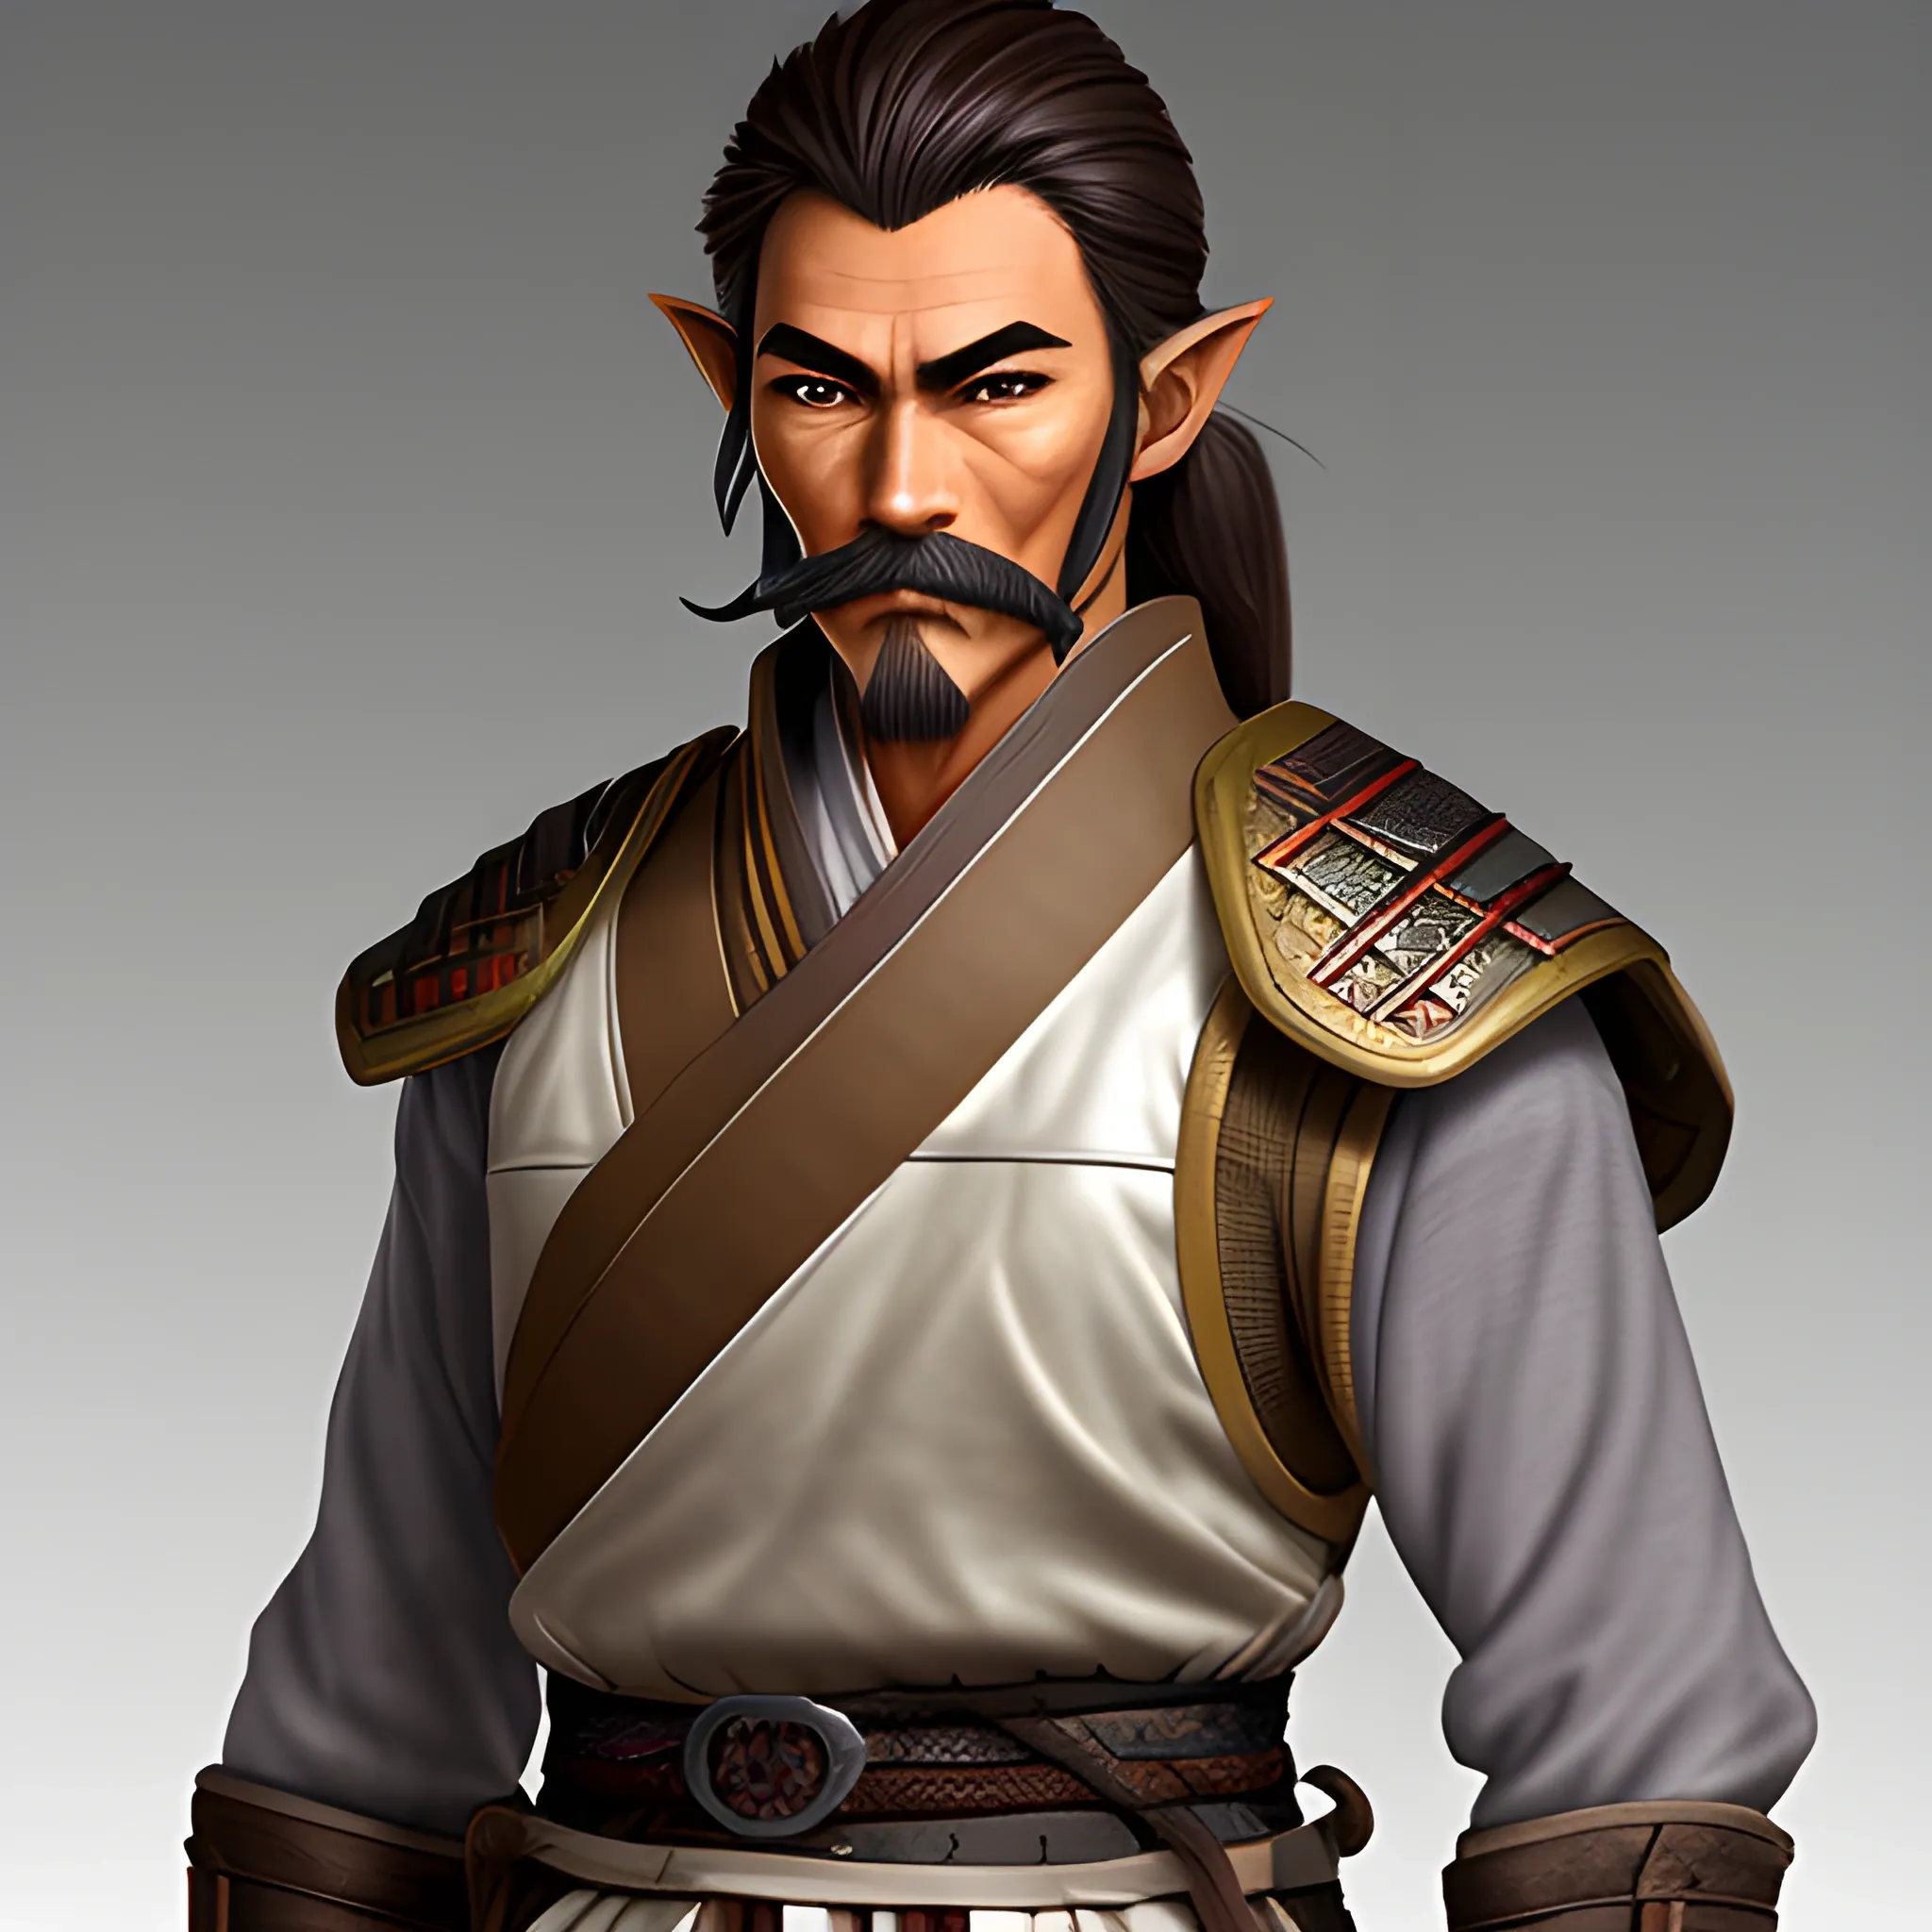  a Samurai Fighter in 5E and is a Wood Elf with dark brown hairs relatively tan skin, and silver eyes. He wears a worn leather duster over a vest with a white shirt and tie (much like the portrait) and has a handlebar mustache,He carries a rifle with veins of glowing red crystal running through it, Trippy